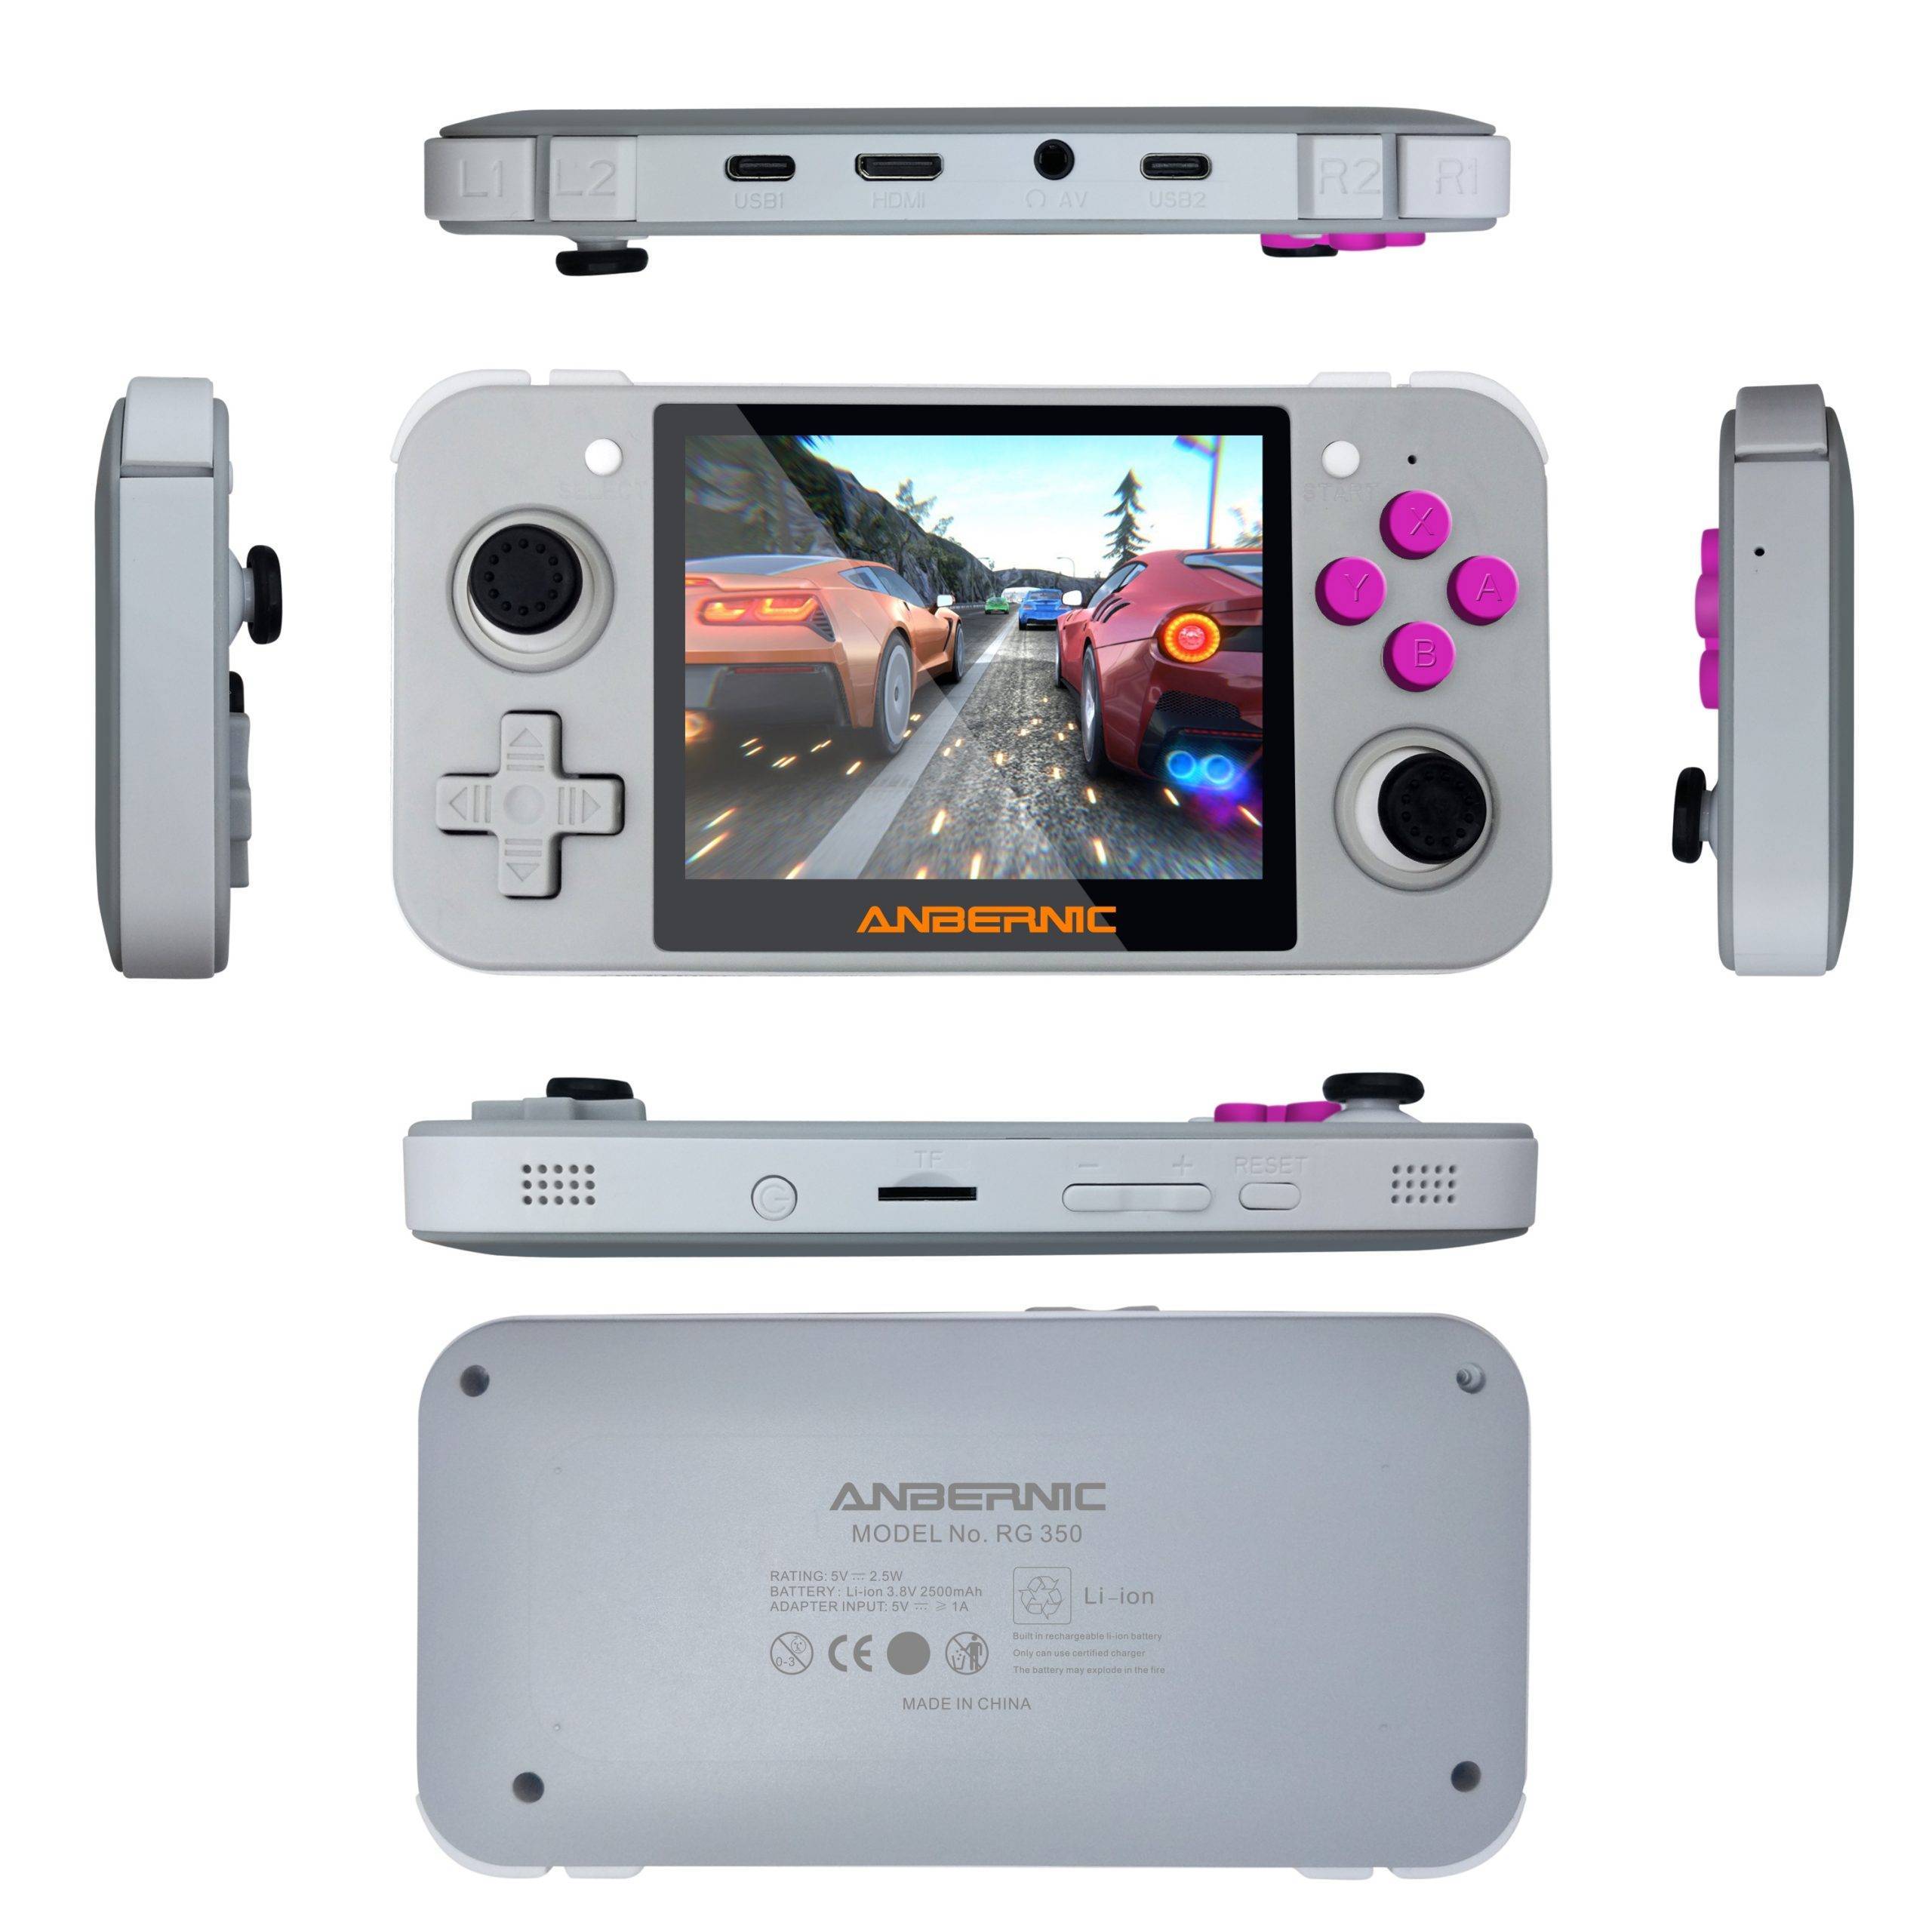 RG350 Handheld Game Console by Anbernic